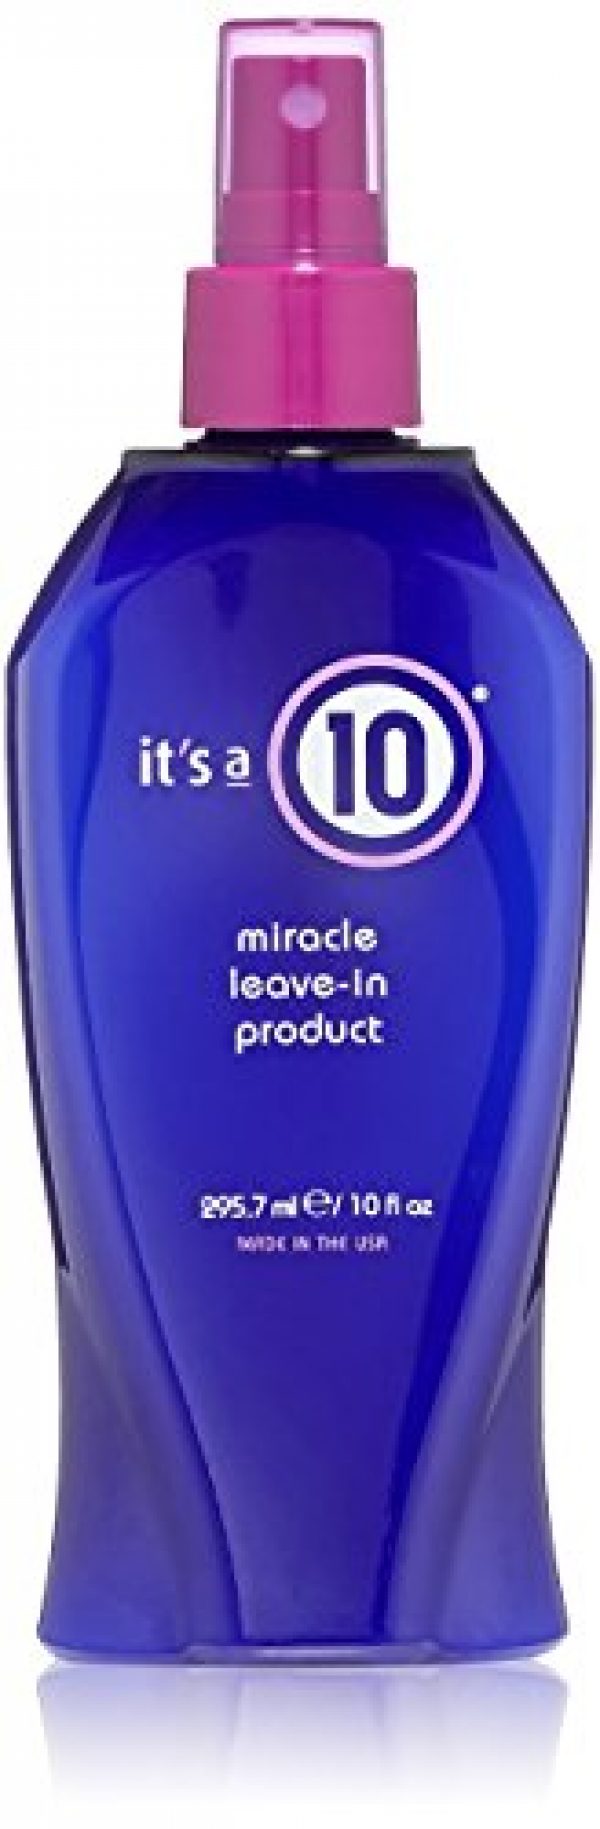 It's A 10 Haircare Miracle Leave-In Conditioner Spray - 10 oz. - 1ct 10